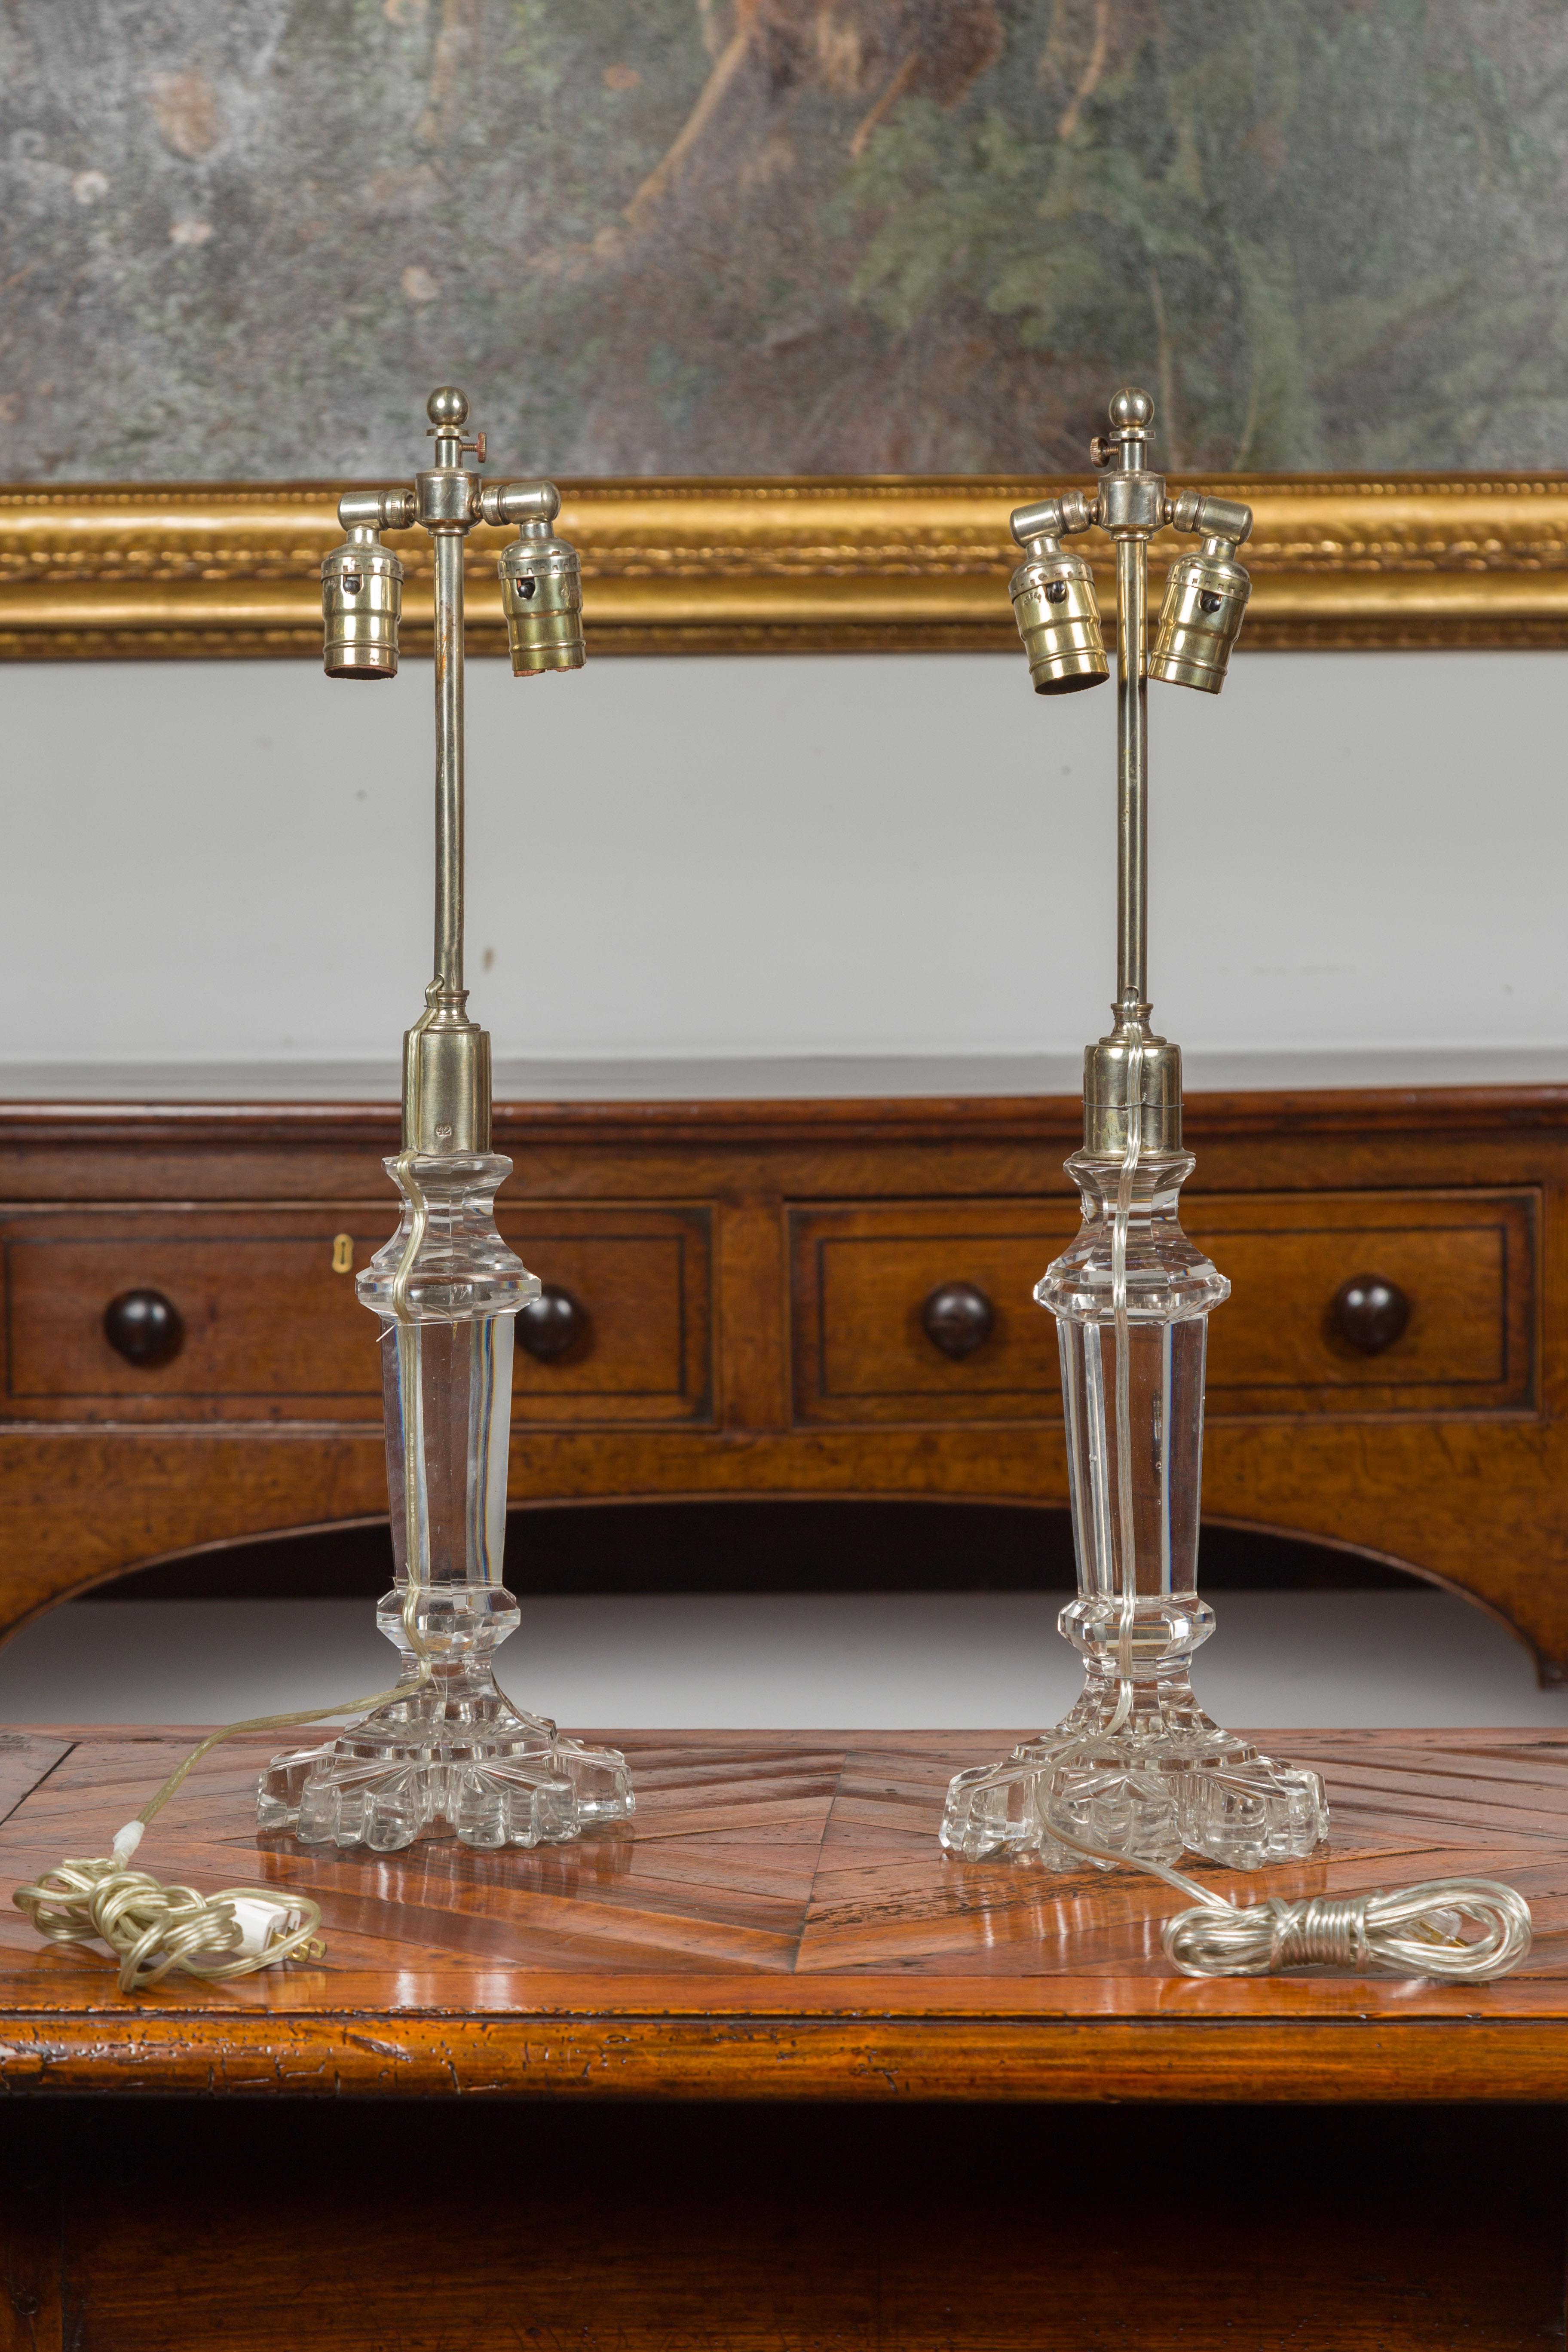 Pair of Irish Crystal 1850s Two-Light Table Lamps with Floral Shaped Bases For Sale 4